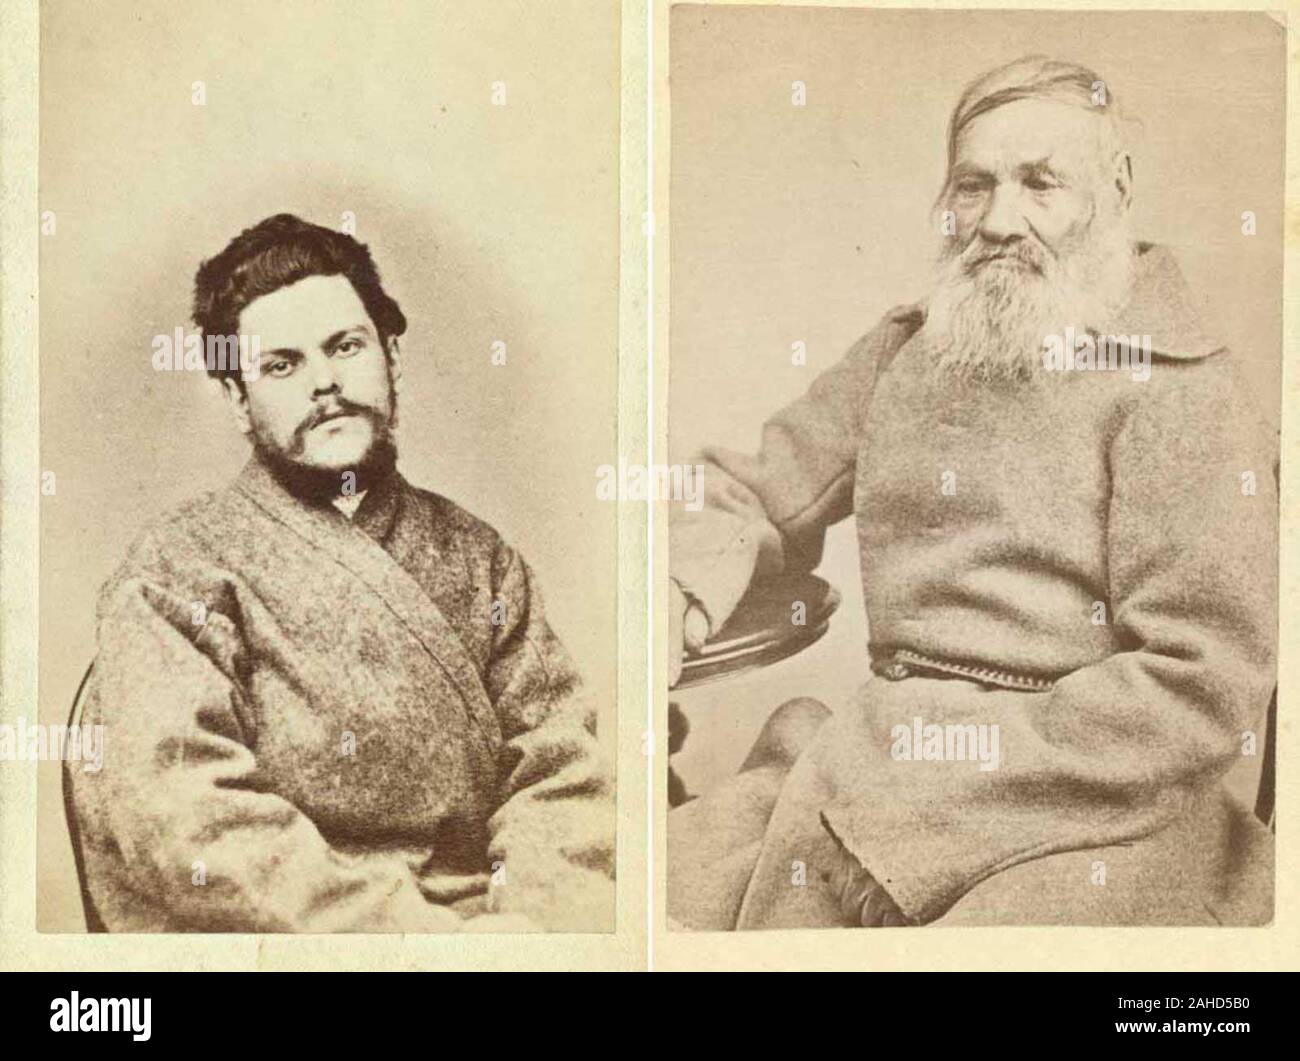 exiles and convicts of Tsarists Russia, 1885 Stock Photo